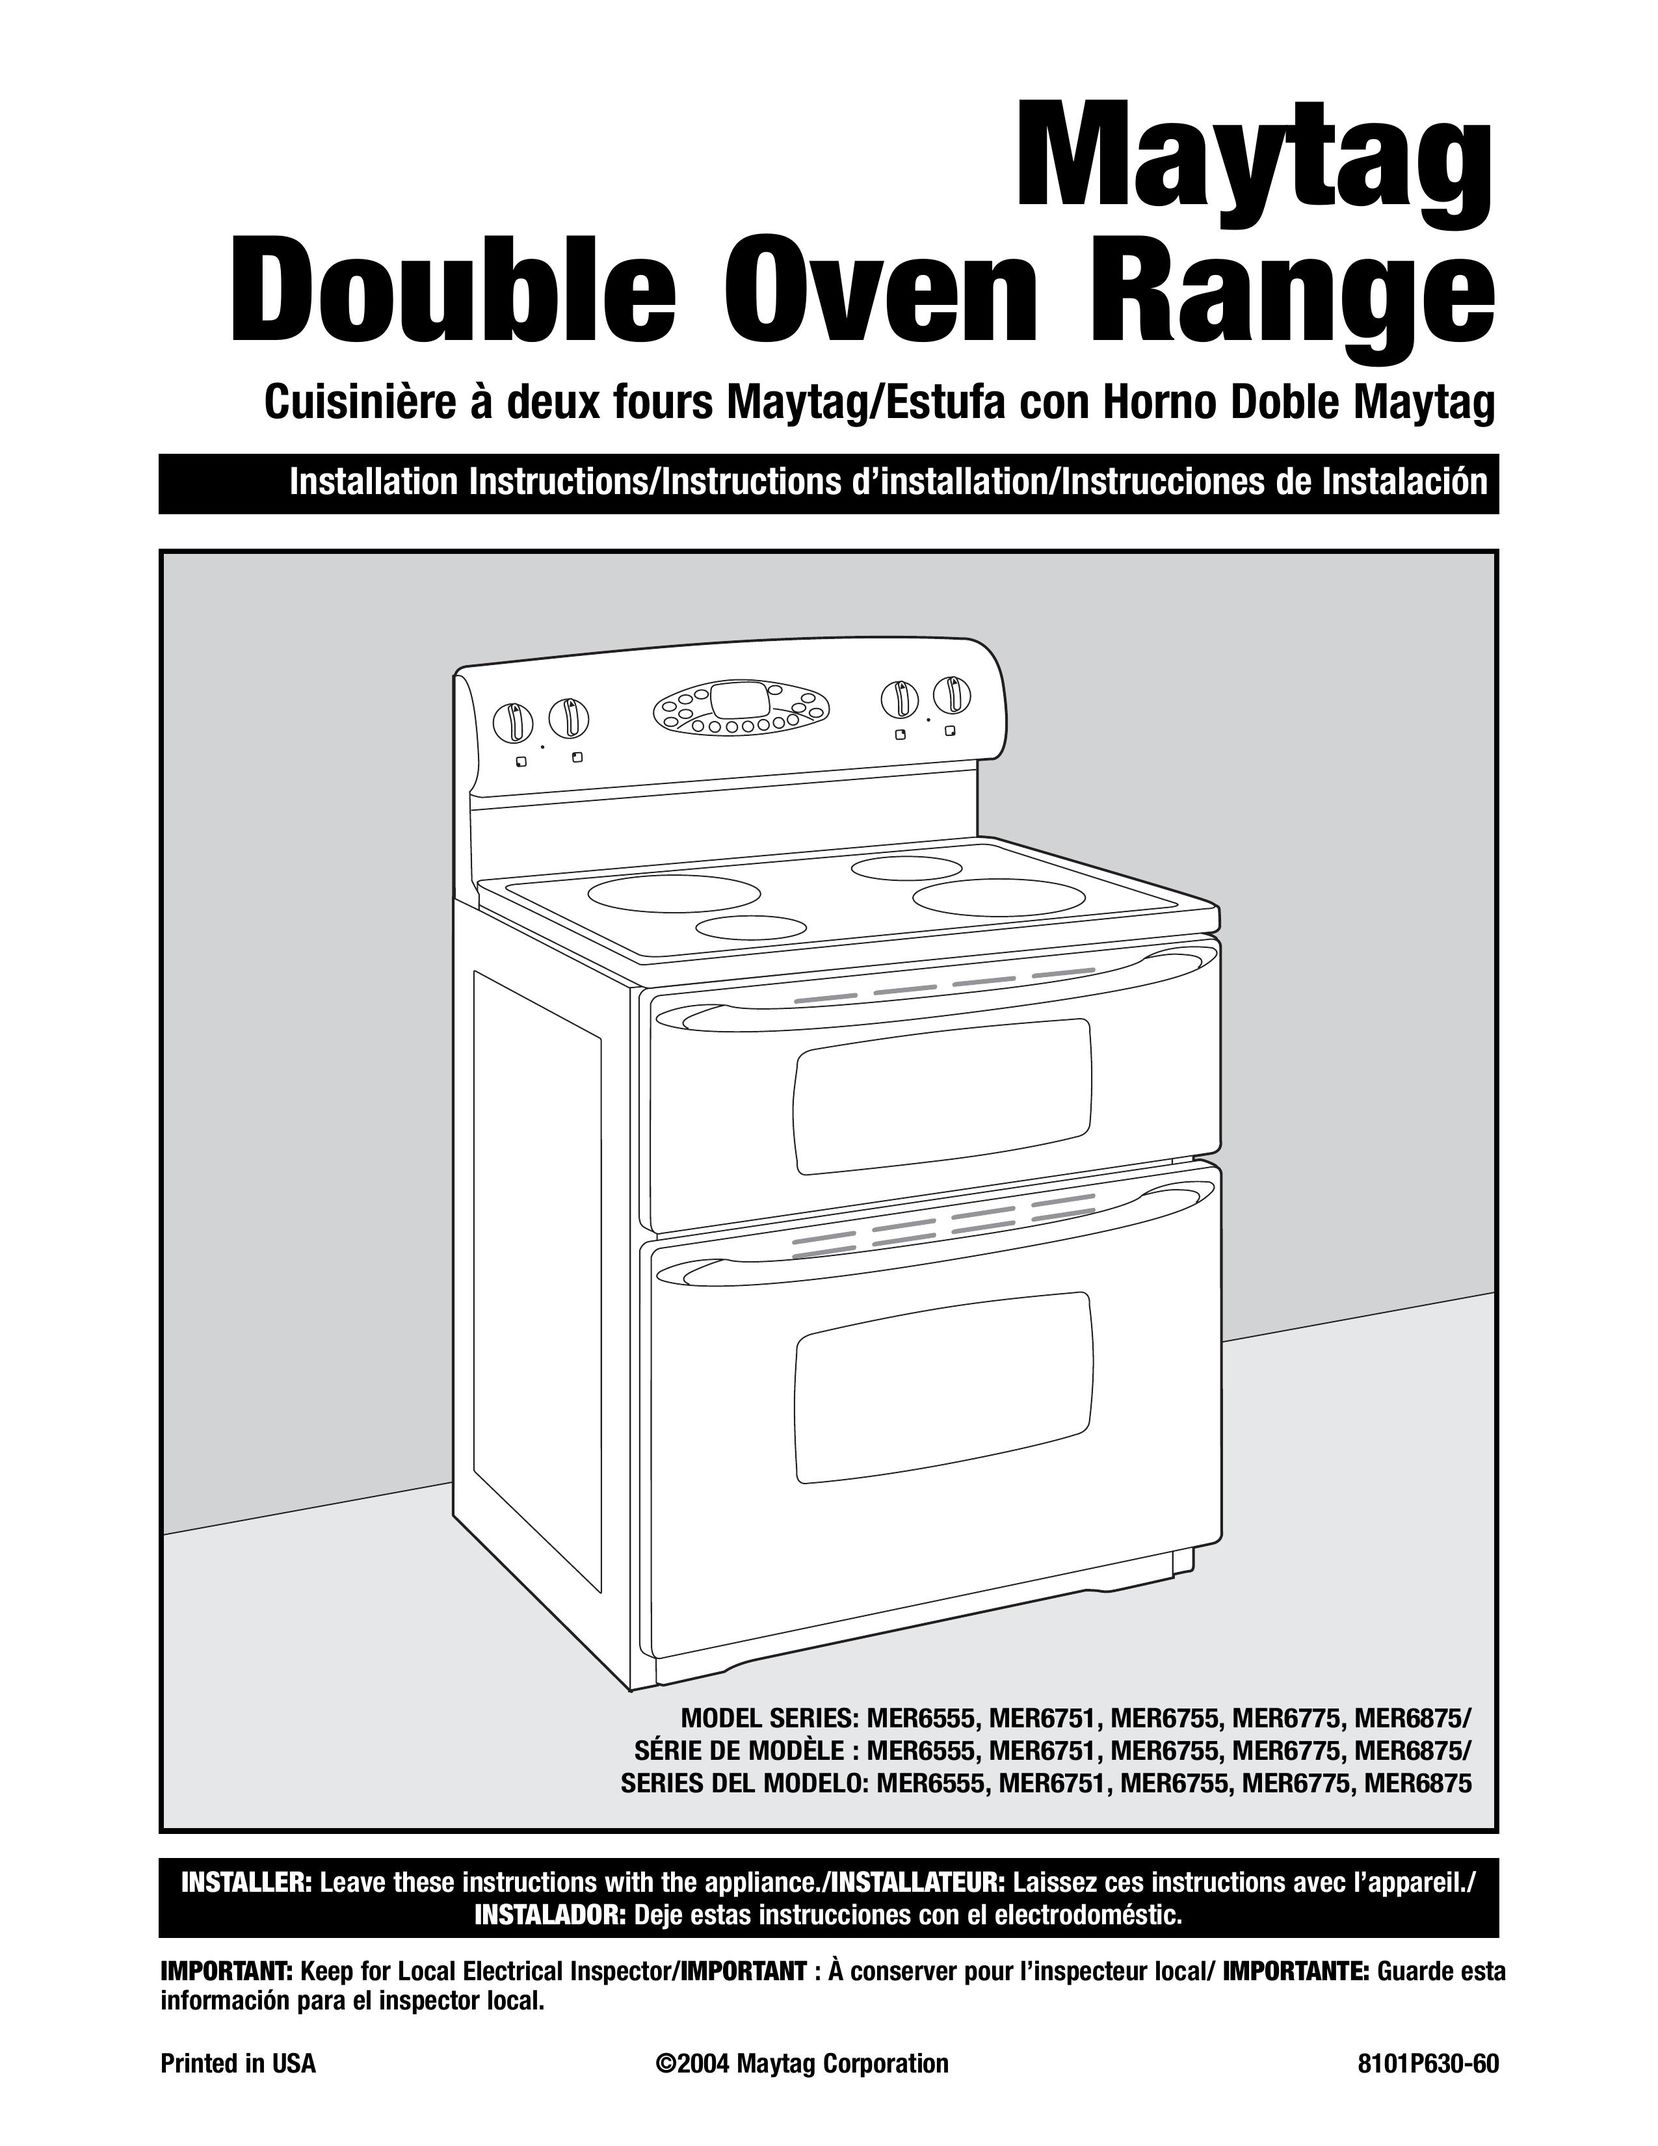 Maytag MER6875 Double Oven User Manual